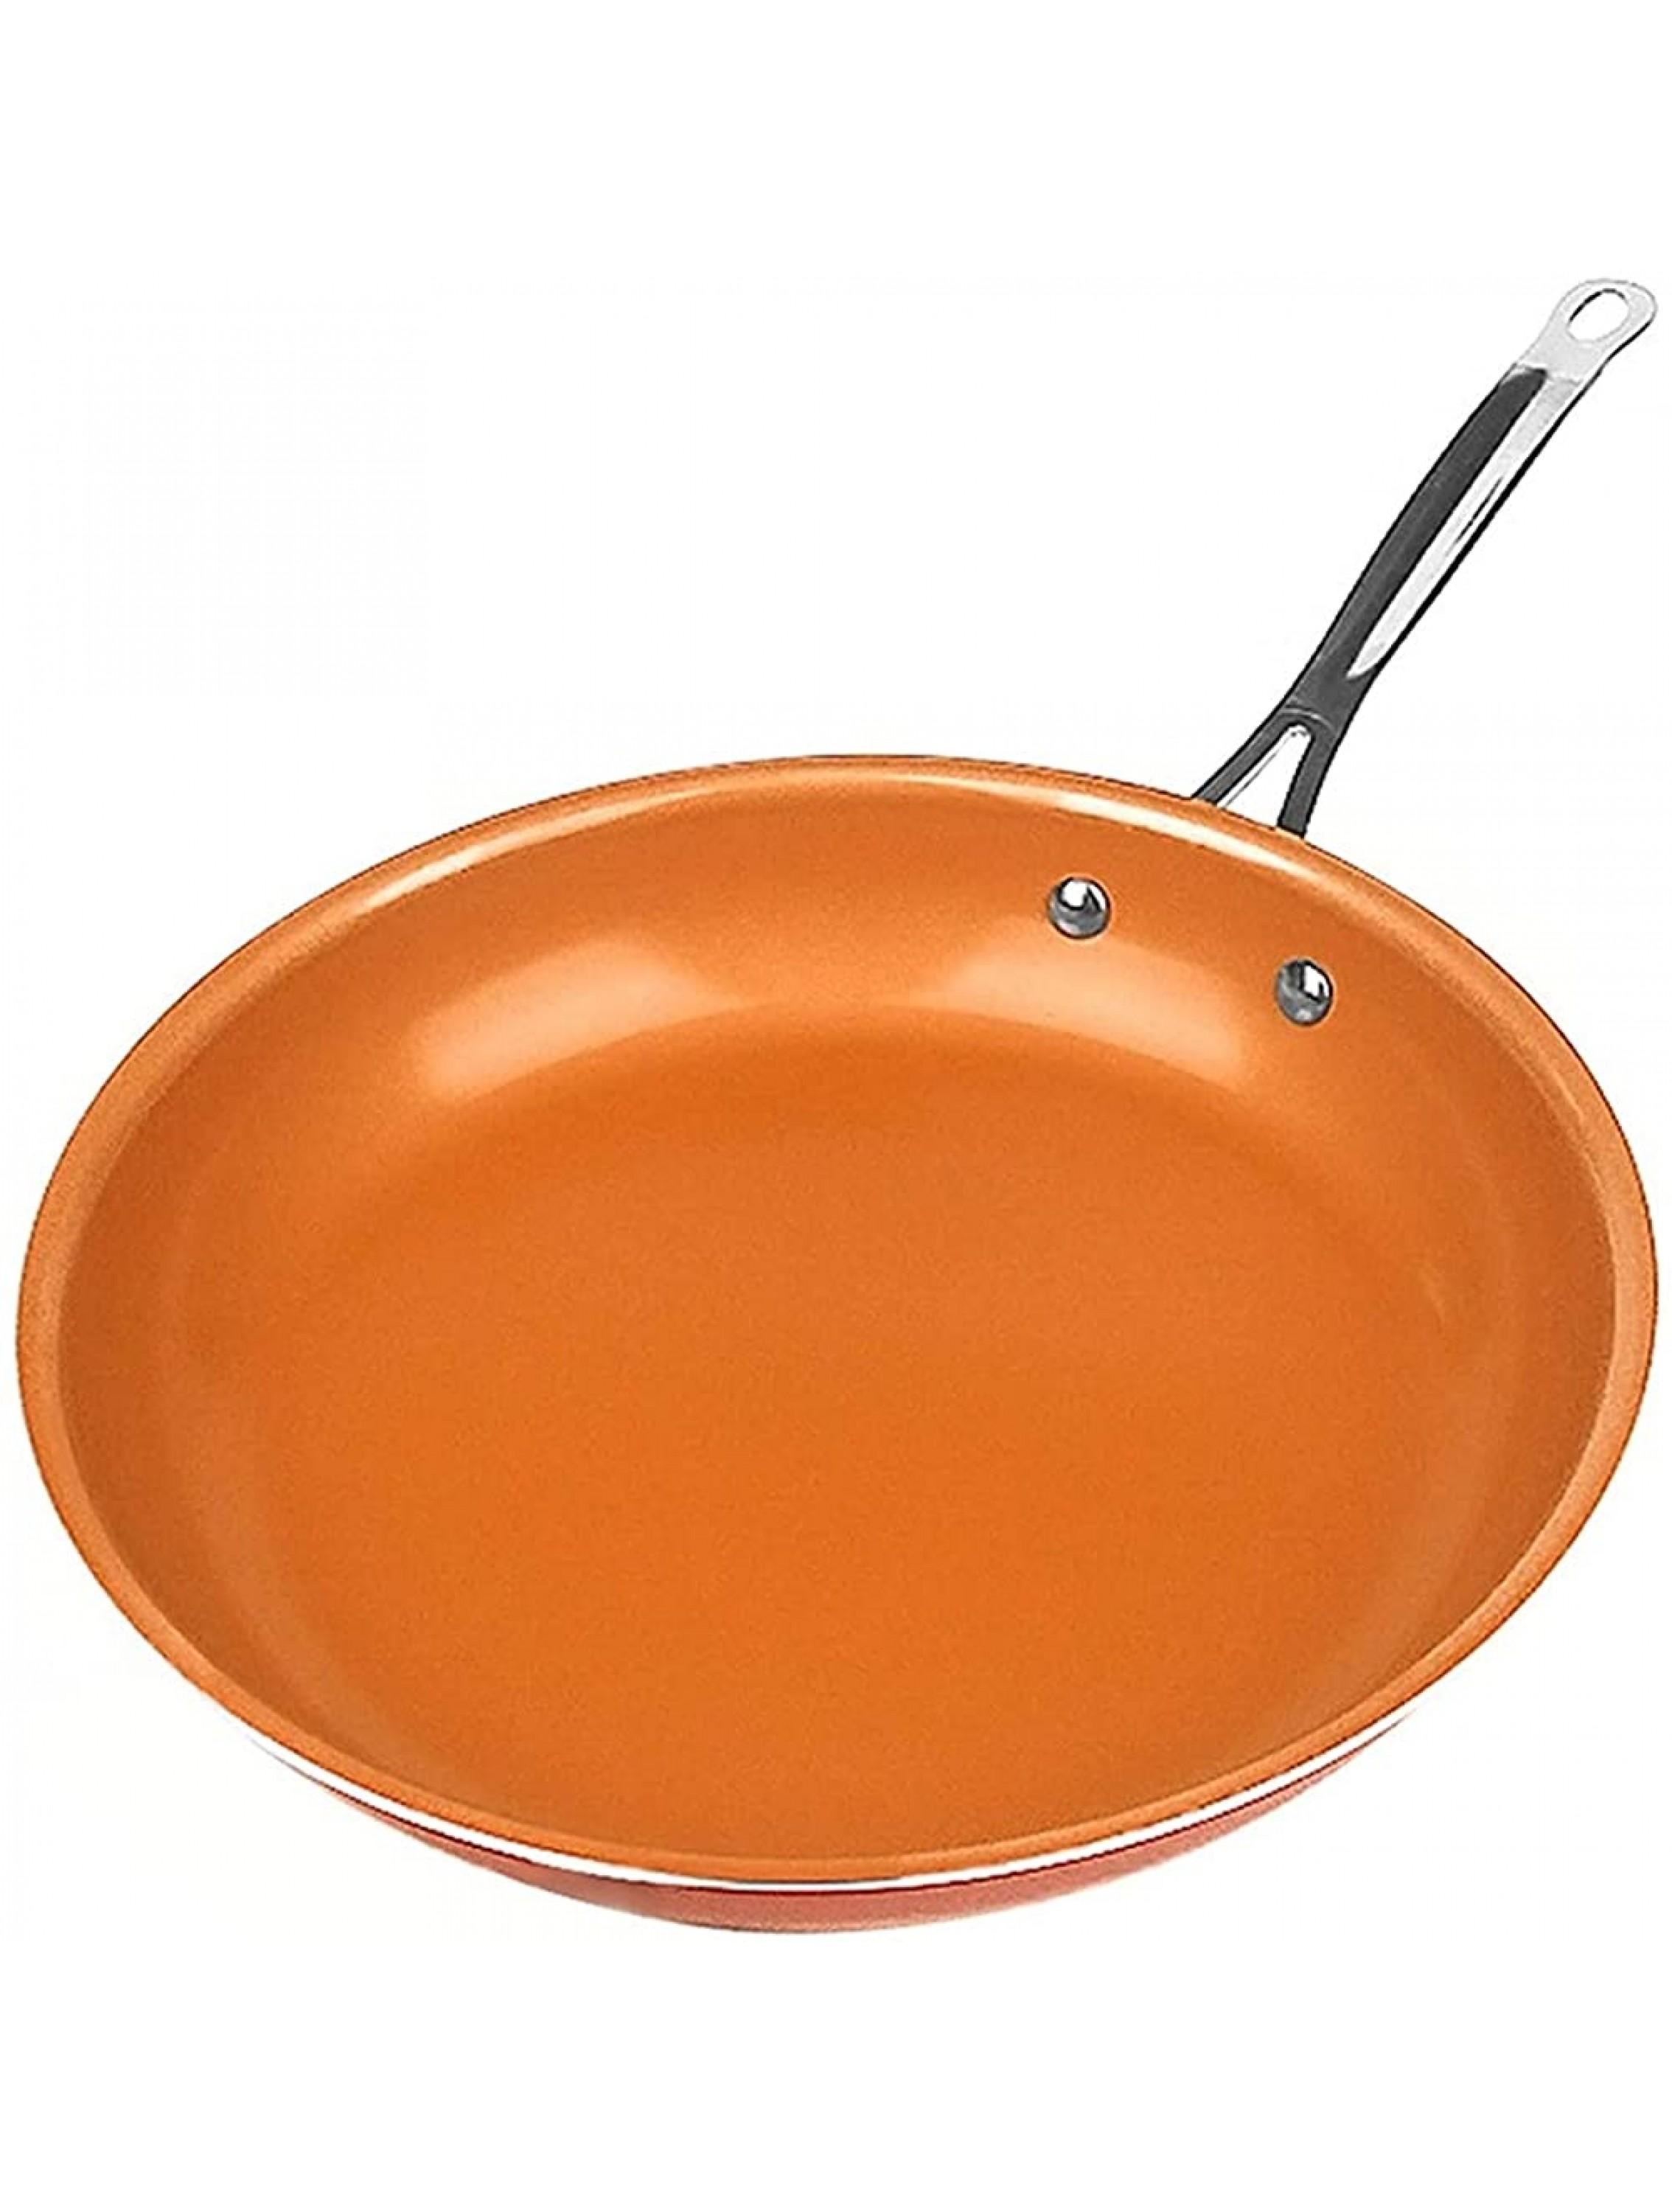 WUYIN Non-stick Copper Frying Pans Skillets With Ceramic Coating Induction Cooking Oven Cooking Pot Nonstick Pan Cookware Chef Pan Pan Color : 24cm - B2T0TZYDY